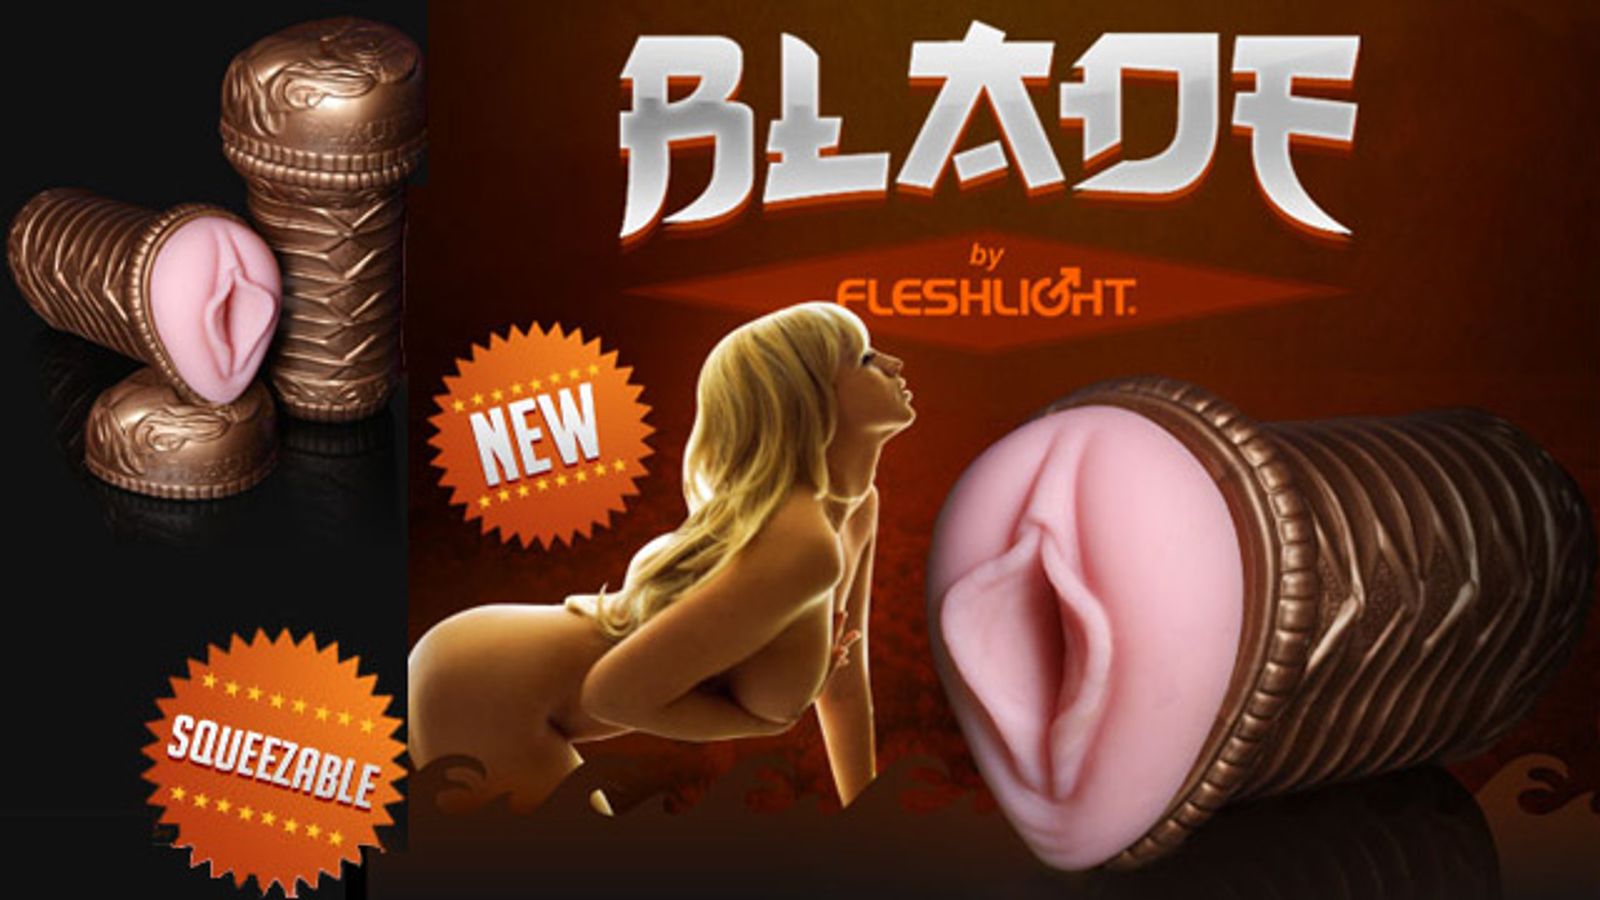 Blade by Fleshlight: Company’s First New Product in 10 Years